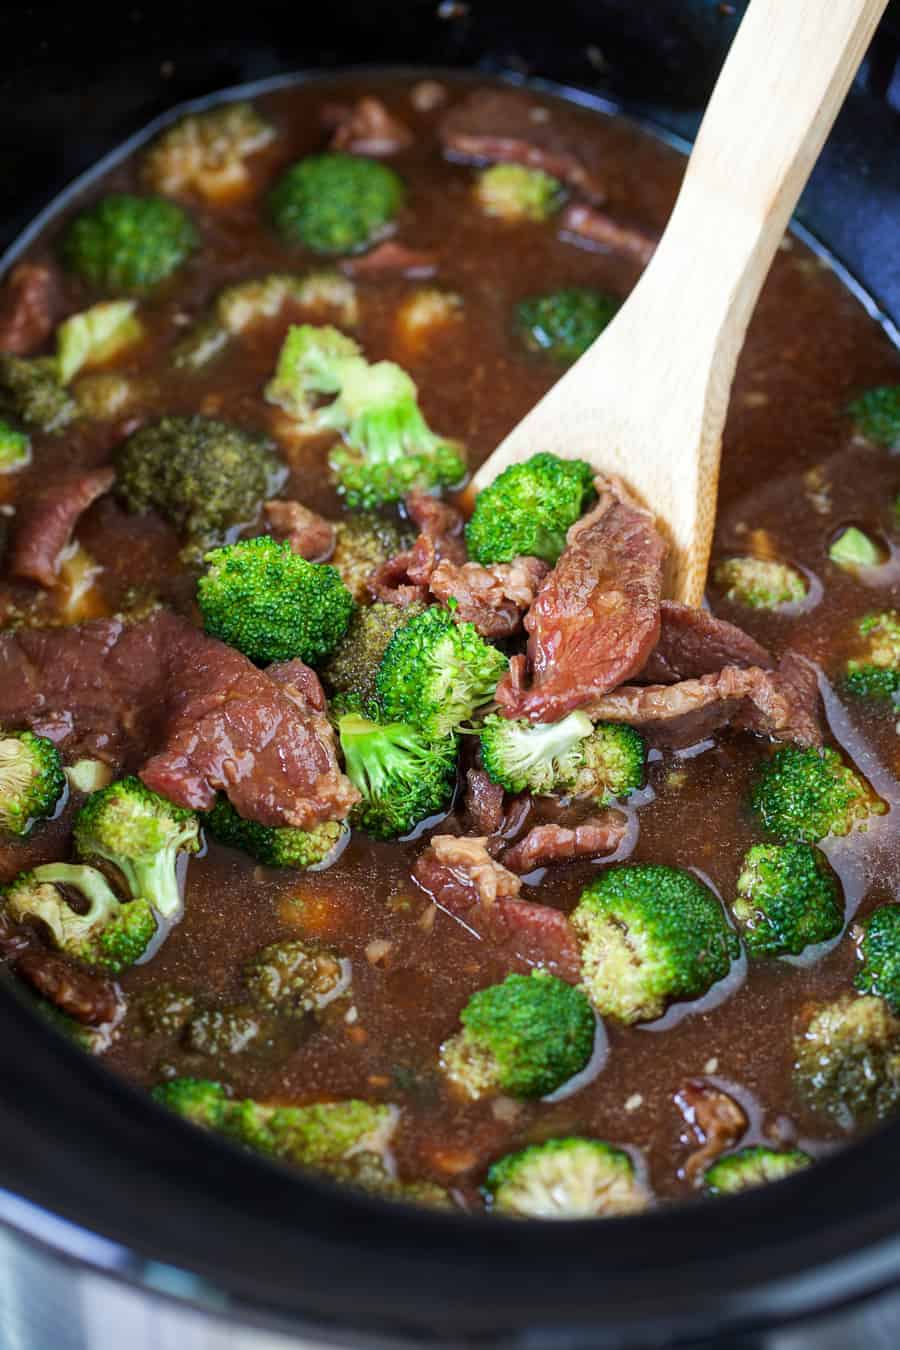 Spoon being dipped into Slow Cooker Beef and Broccoli